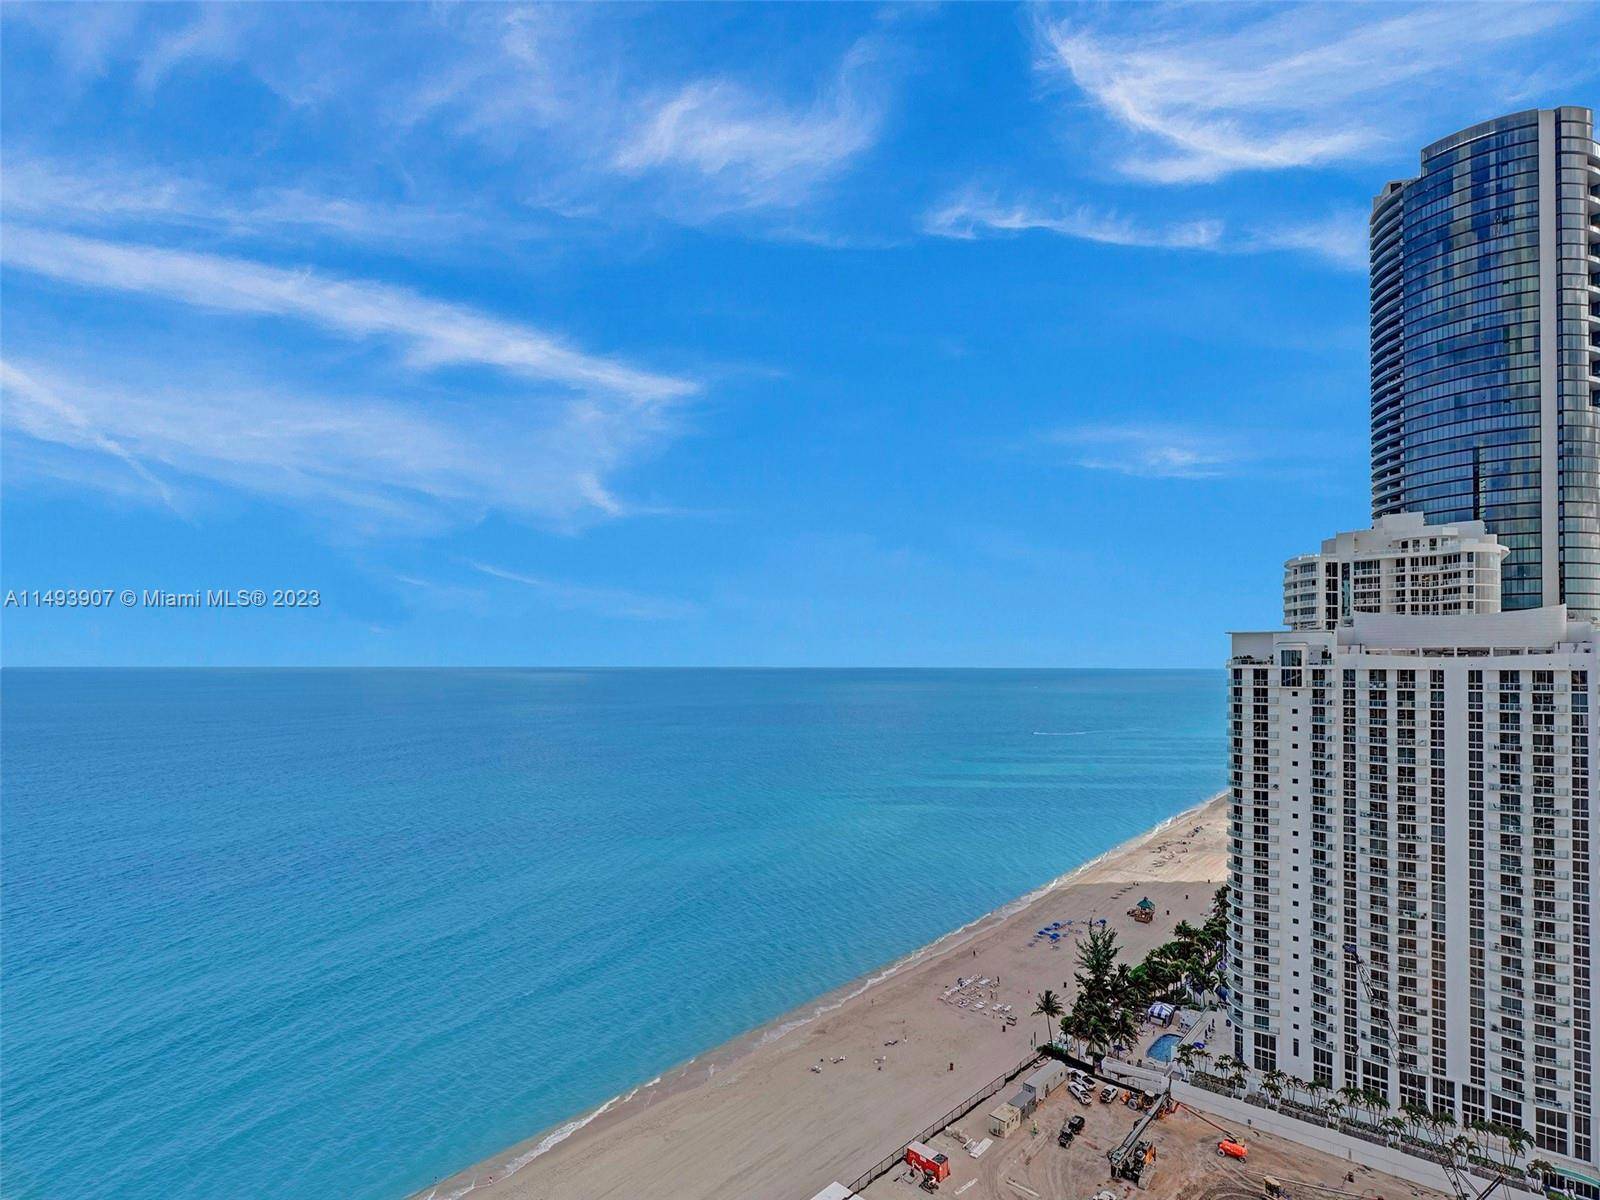 Highly updated 2 Bedrooms, 2 Baths condo in Sunny Isles Beach with spectacular ocean views and beach access.